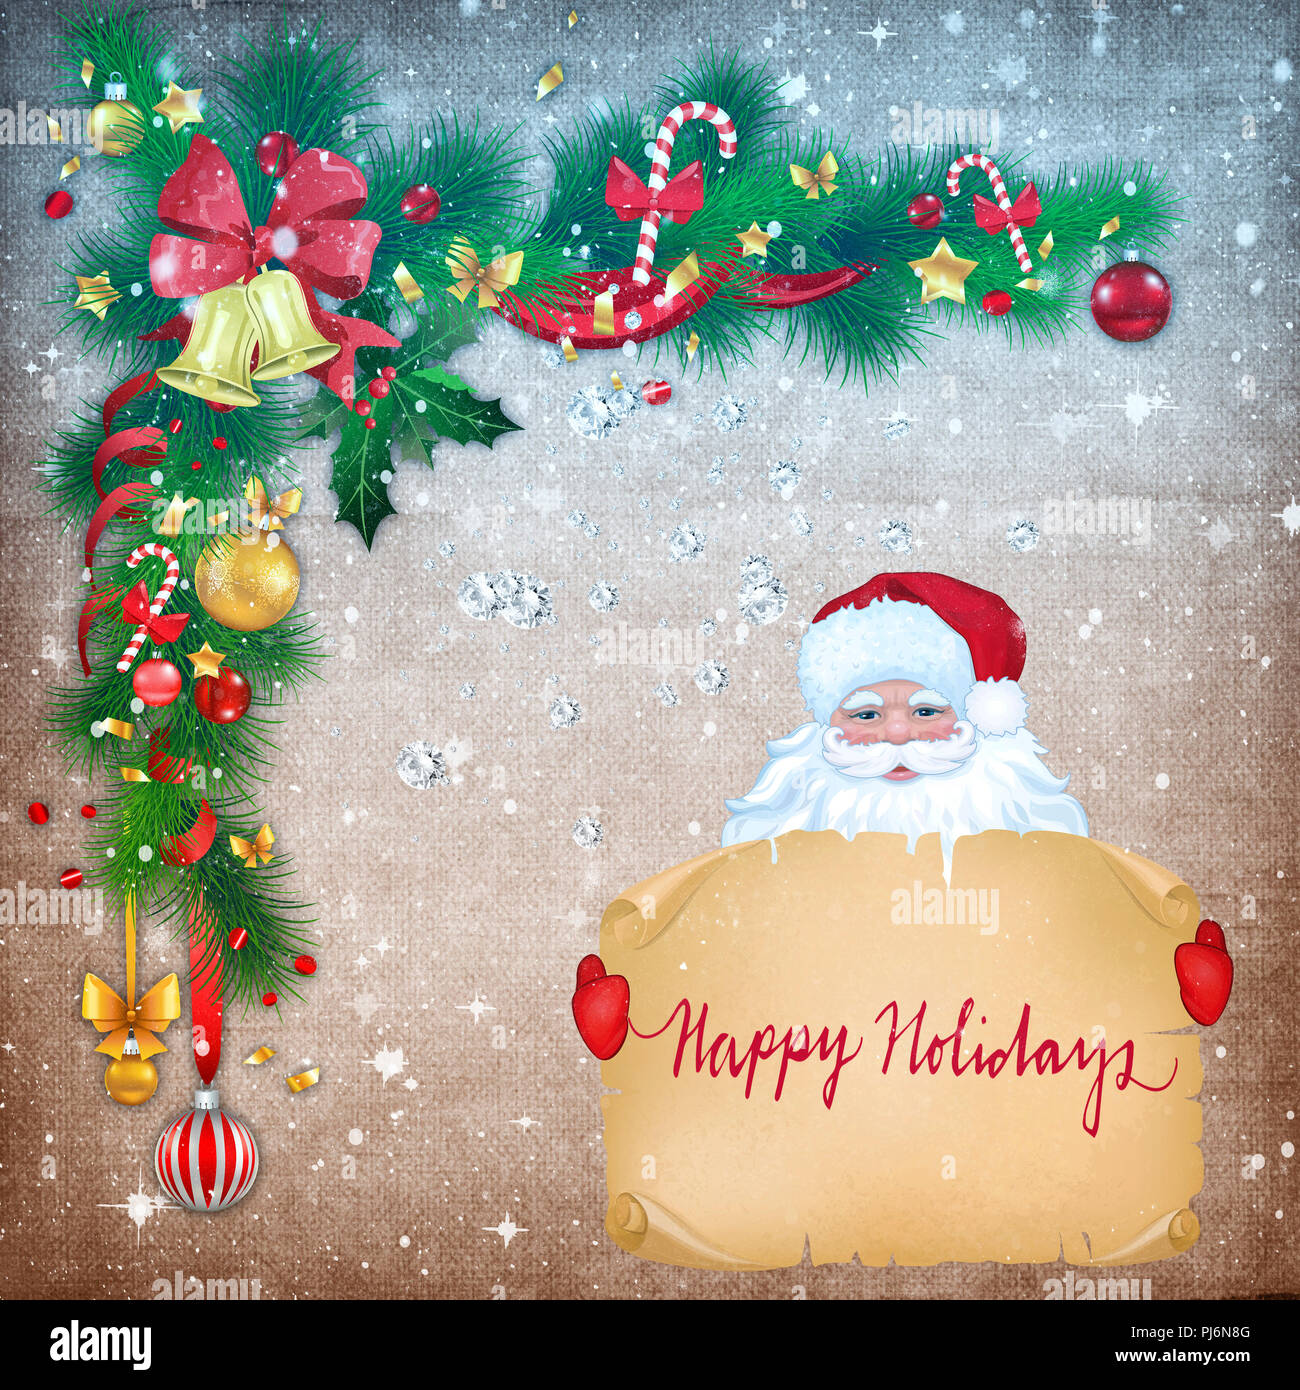 https://c8.alamy.com/comp/PJ6N8G/beautiful-christmas-card-in-vintage-style-with-the-image-of-santa-claus-and-congratulations-on-the-holiday-PJ6N8G.jpg